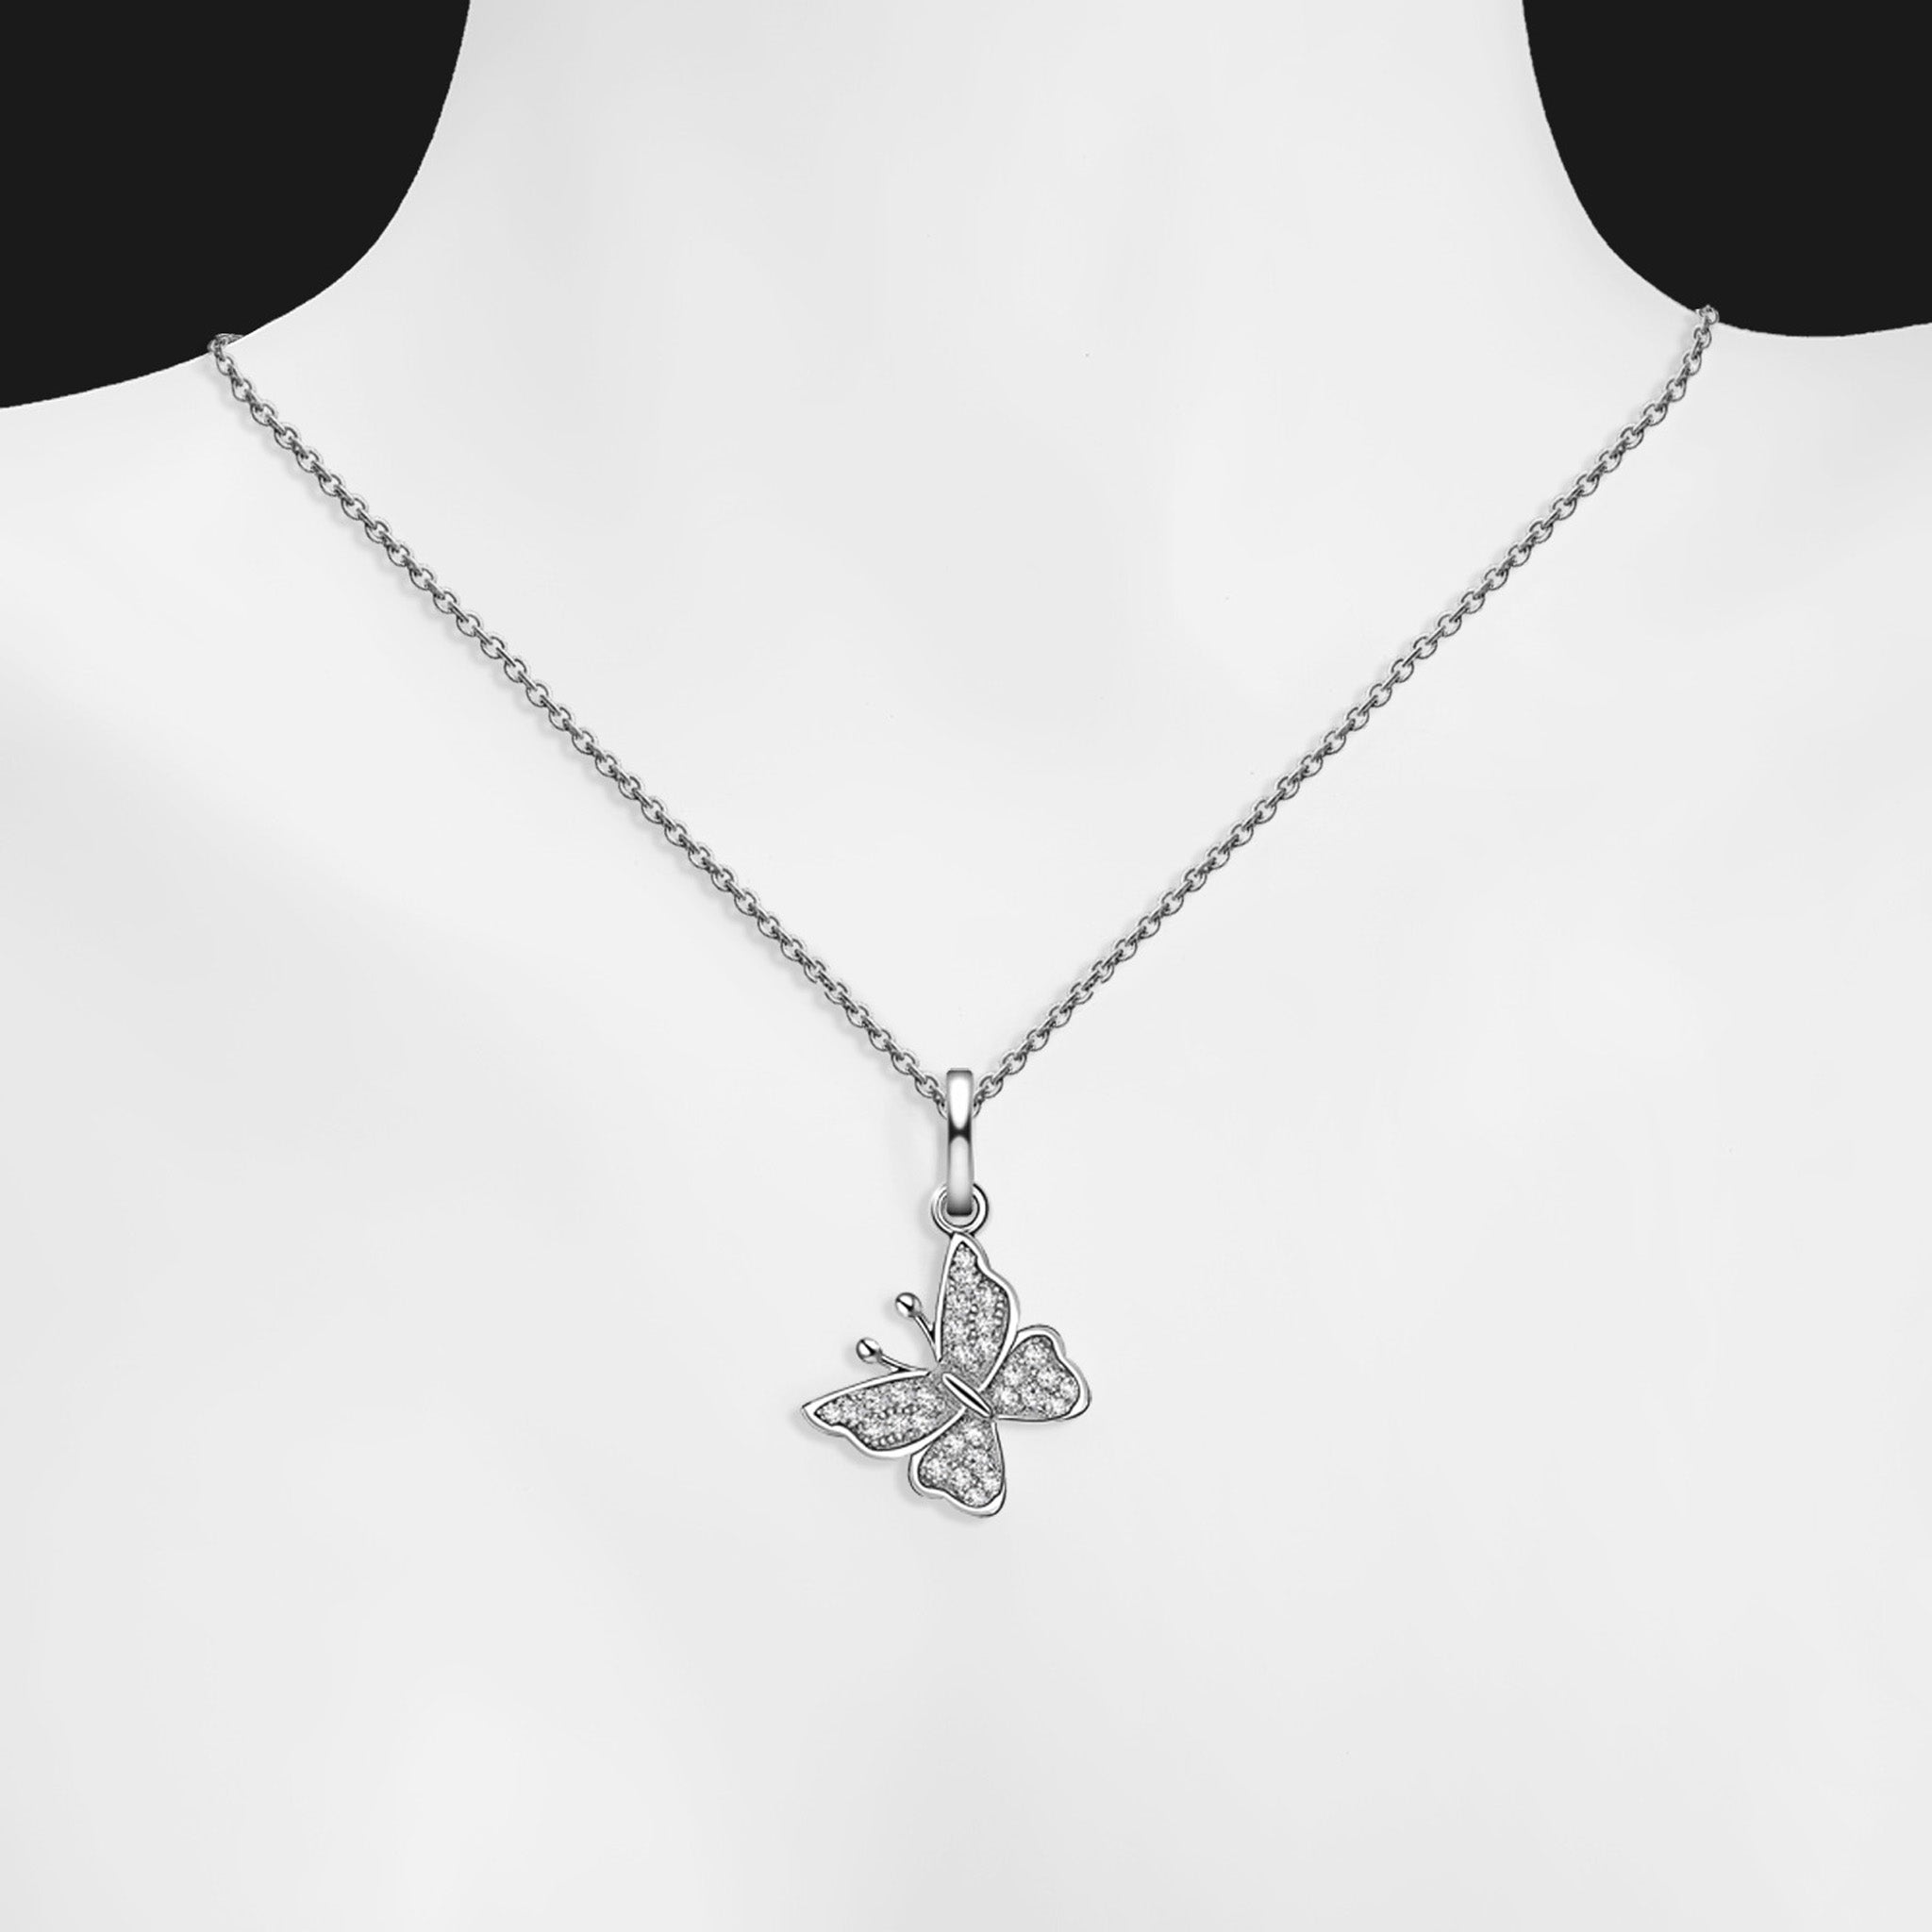 Decent Butterfly White Ziconia Sterling Silver Fashion Necklace